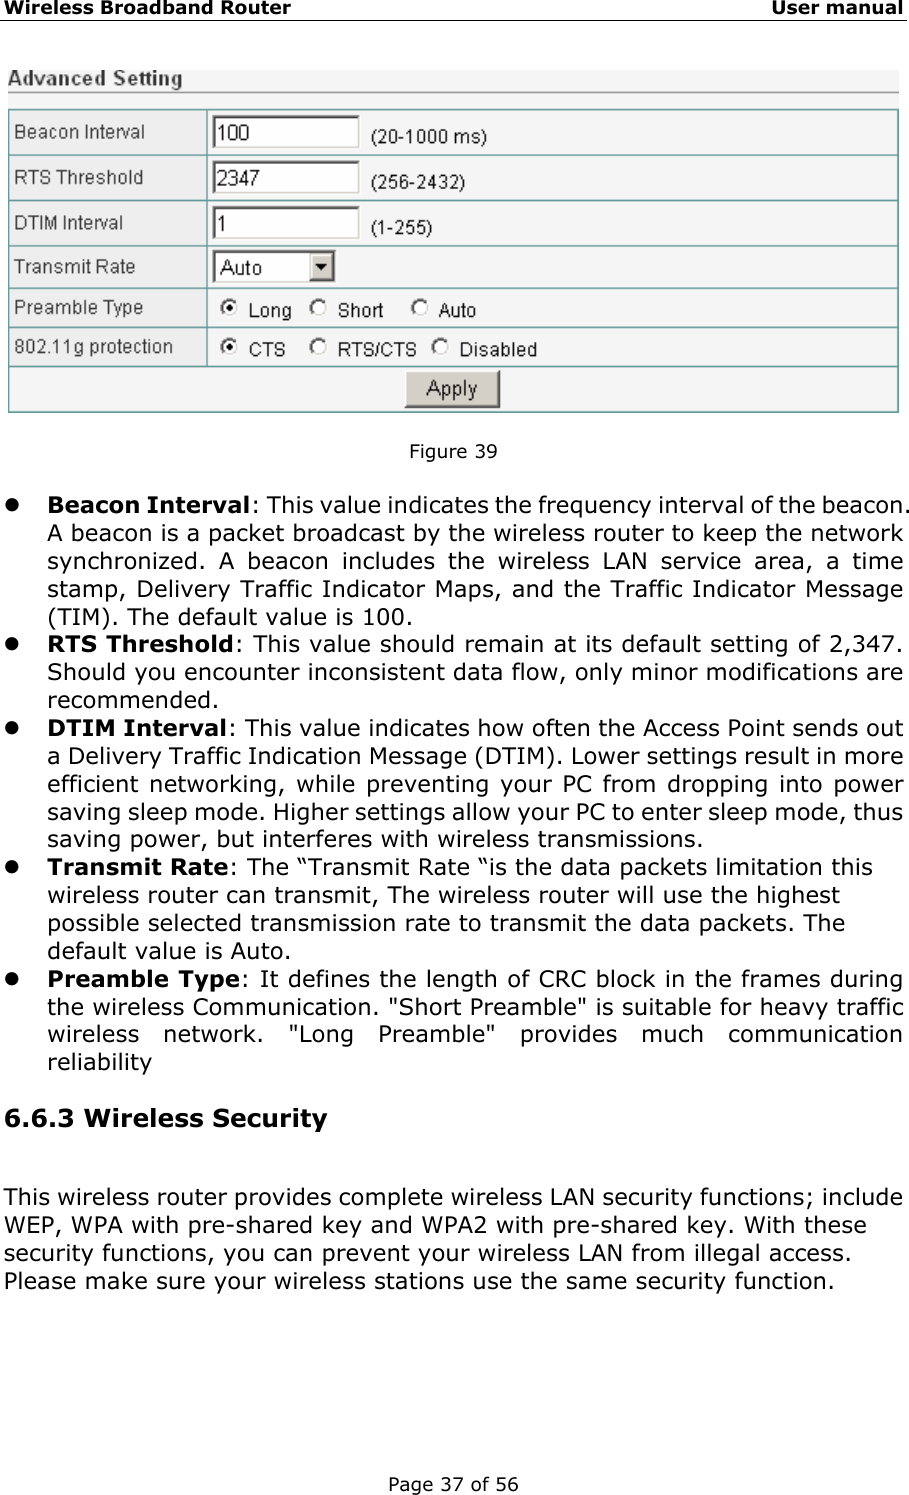 Wireless Broadband Router                                                   User manual Page 37 of 56   Figure 39  z Beacon Interval: This value indicates the frequency interval of the beacon. A beacon is a packet broadcast by the wireless router to keep the network synchronized. A beacon includes the wireless LAN service area, a time stamp, Delivery Traffic Indicator Maps, and the Traffic Indicator Message (TIM). The default value is 100. z RTS Threshold: This value should remain at its default setting of 2,347. Should you encounter inconsistent data flow, only minor modifications are recommended. z DTIM Interval: This value indicates how often the Access Point sends out a Delivery Traffic Indication Message (DTIM). Lower settings result in more efficient networking, while preventing your PC from dropping into power saving sleep mode. Higher settings allow your PC to enter sleep mode, thus saving power, but interferes with wireless transmissions.   z Transmit Rate: The “Transmit Rate “is the data packets limitation this wireless router can transmit, The wireless router will use the highest possible selected transmission rate to transmit the data packets. The default value is Auto. z Preamble Type: It defines the length of CRC block in the frames during the wireless Communication. &quot;Short Preamble&quot; is suitable for heavy traffic wireless network. &quot;Long Preamble&quot; provides much communication reliability  6.6.3 Wireless Security This wireless router provides complete wireless LAN security functions; include WEP, WPA with pre-shared key and WPA2 with pre-shared key. With these security functions, you can prevent your wireless LAN from illegal access. Please make sure your wireless stations use the same security function. 